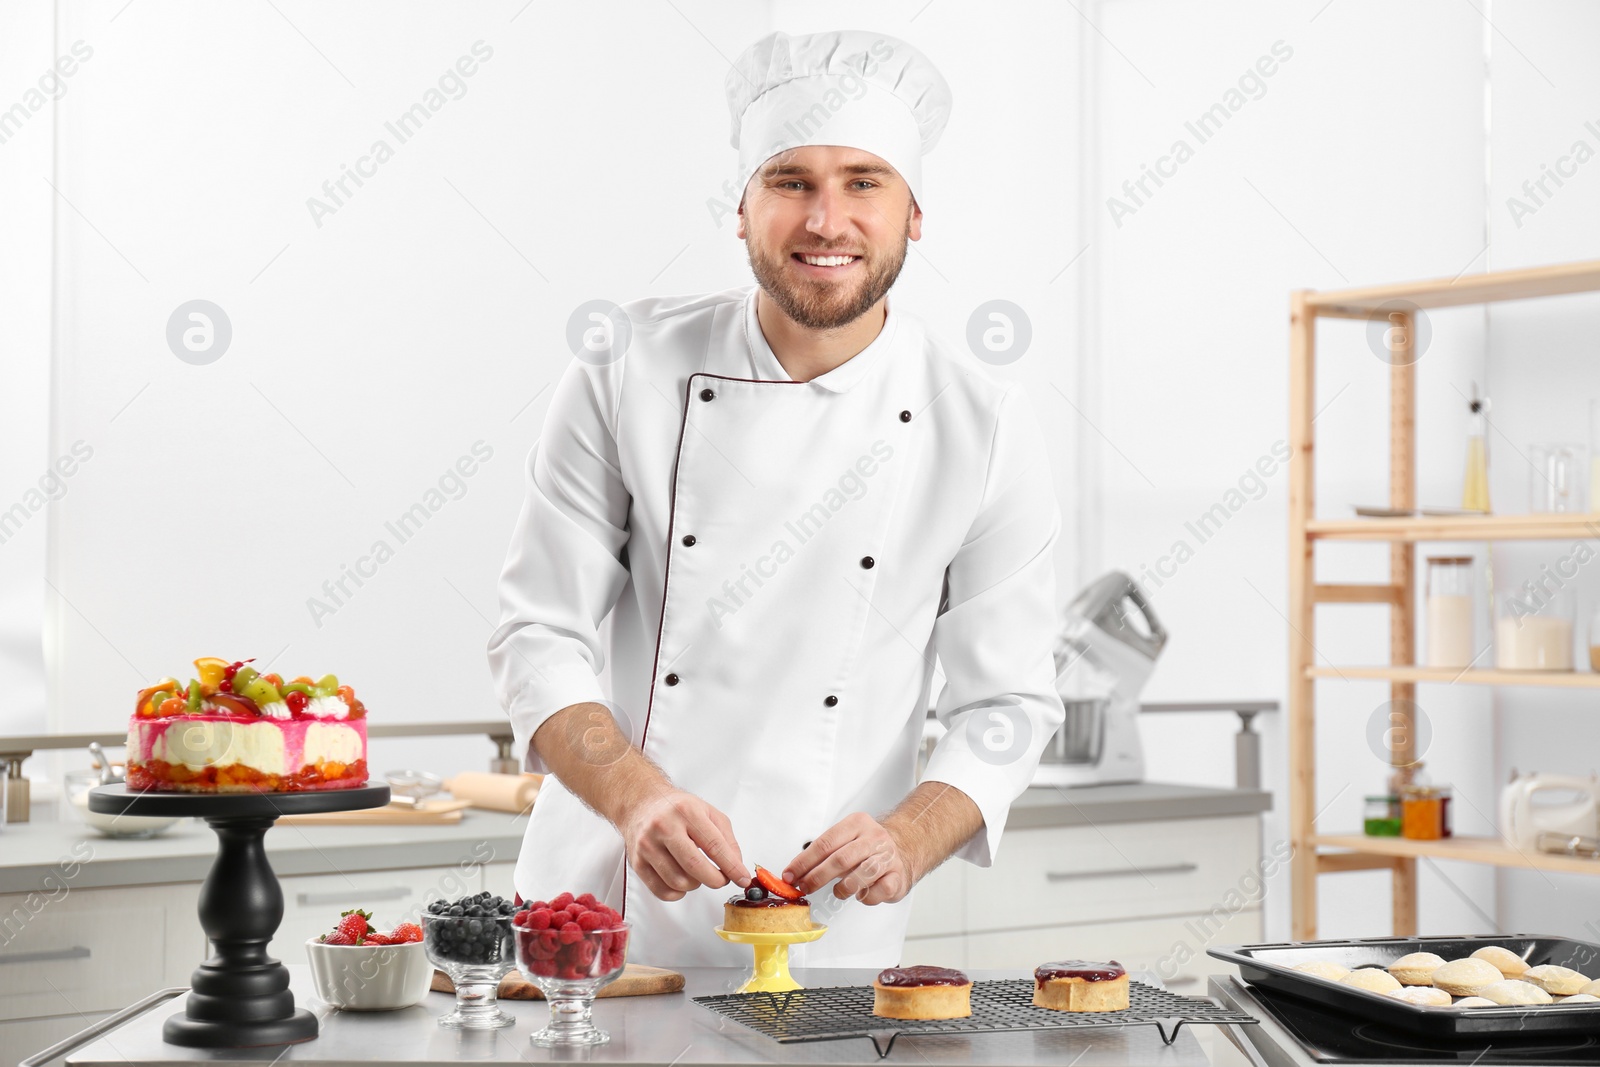 Photo of Male pastry chef preparing dessert at table in kitchen